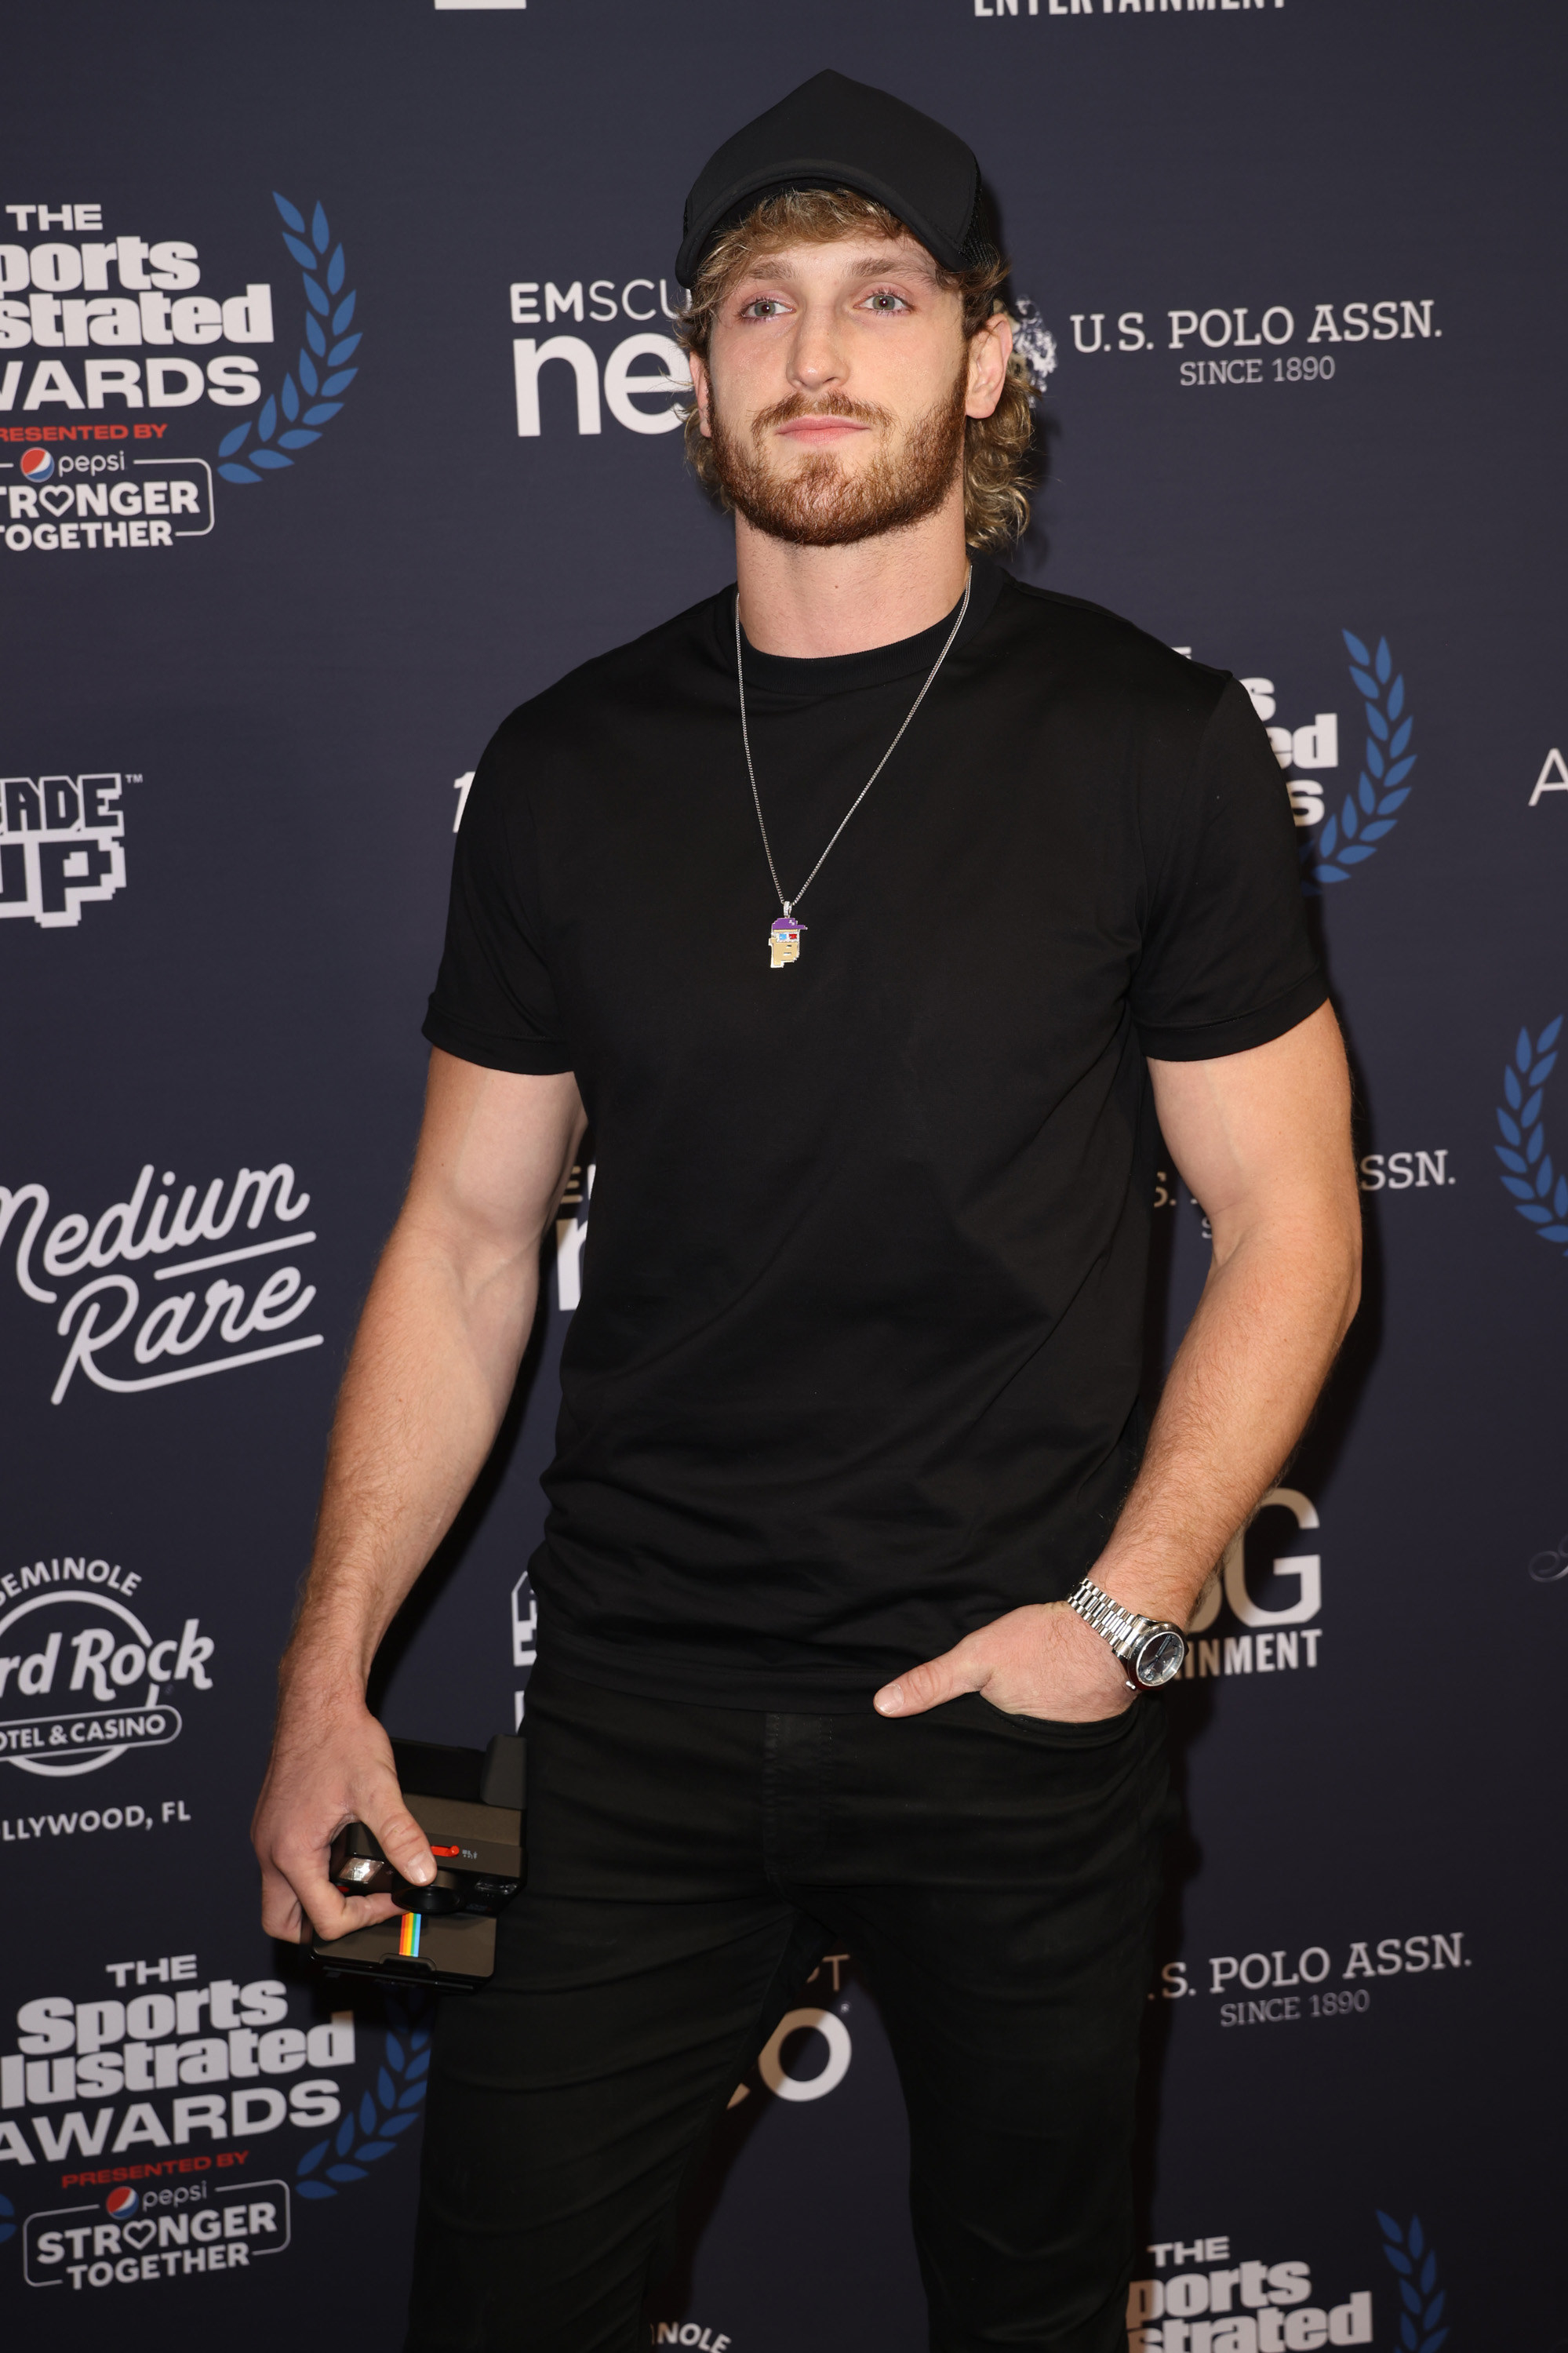 Logan Paul at The 2021 Sports Illustrated Awards on December 07, 2021